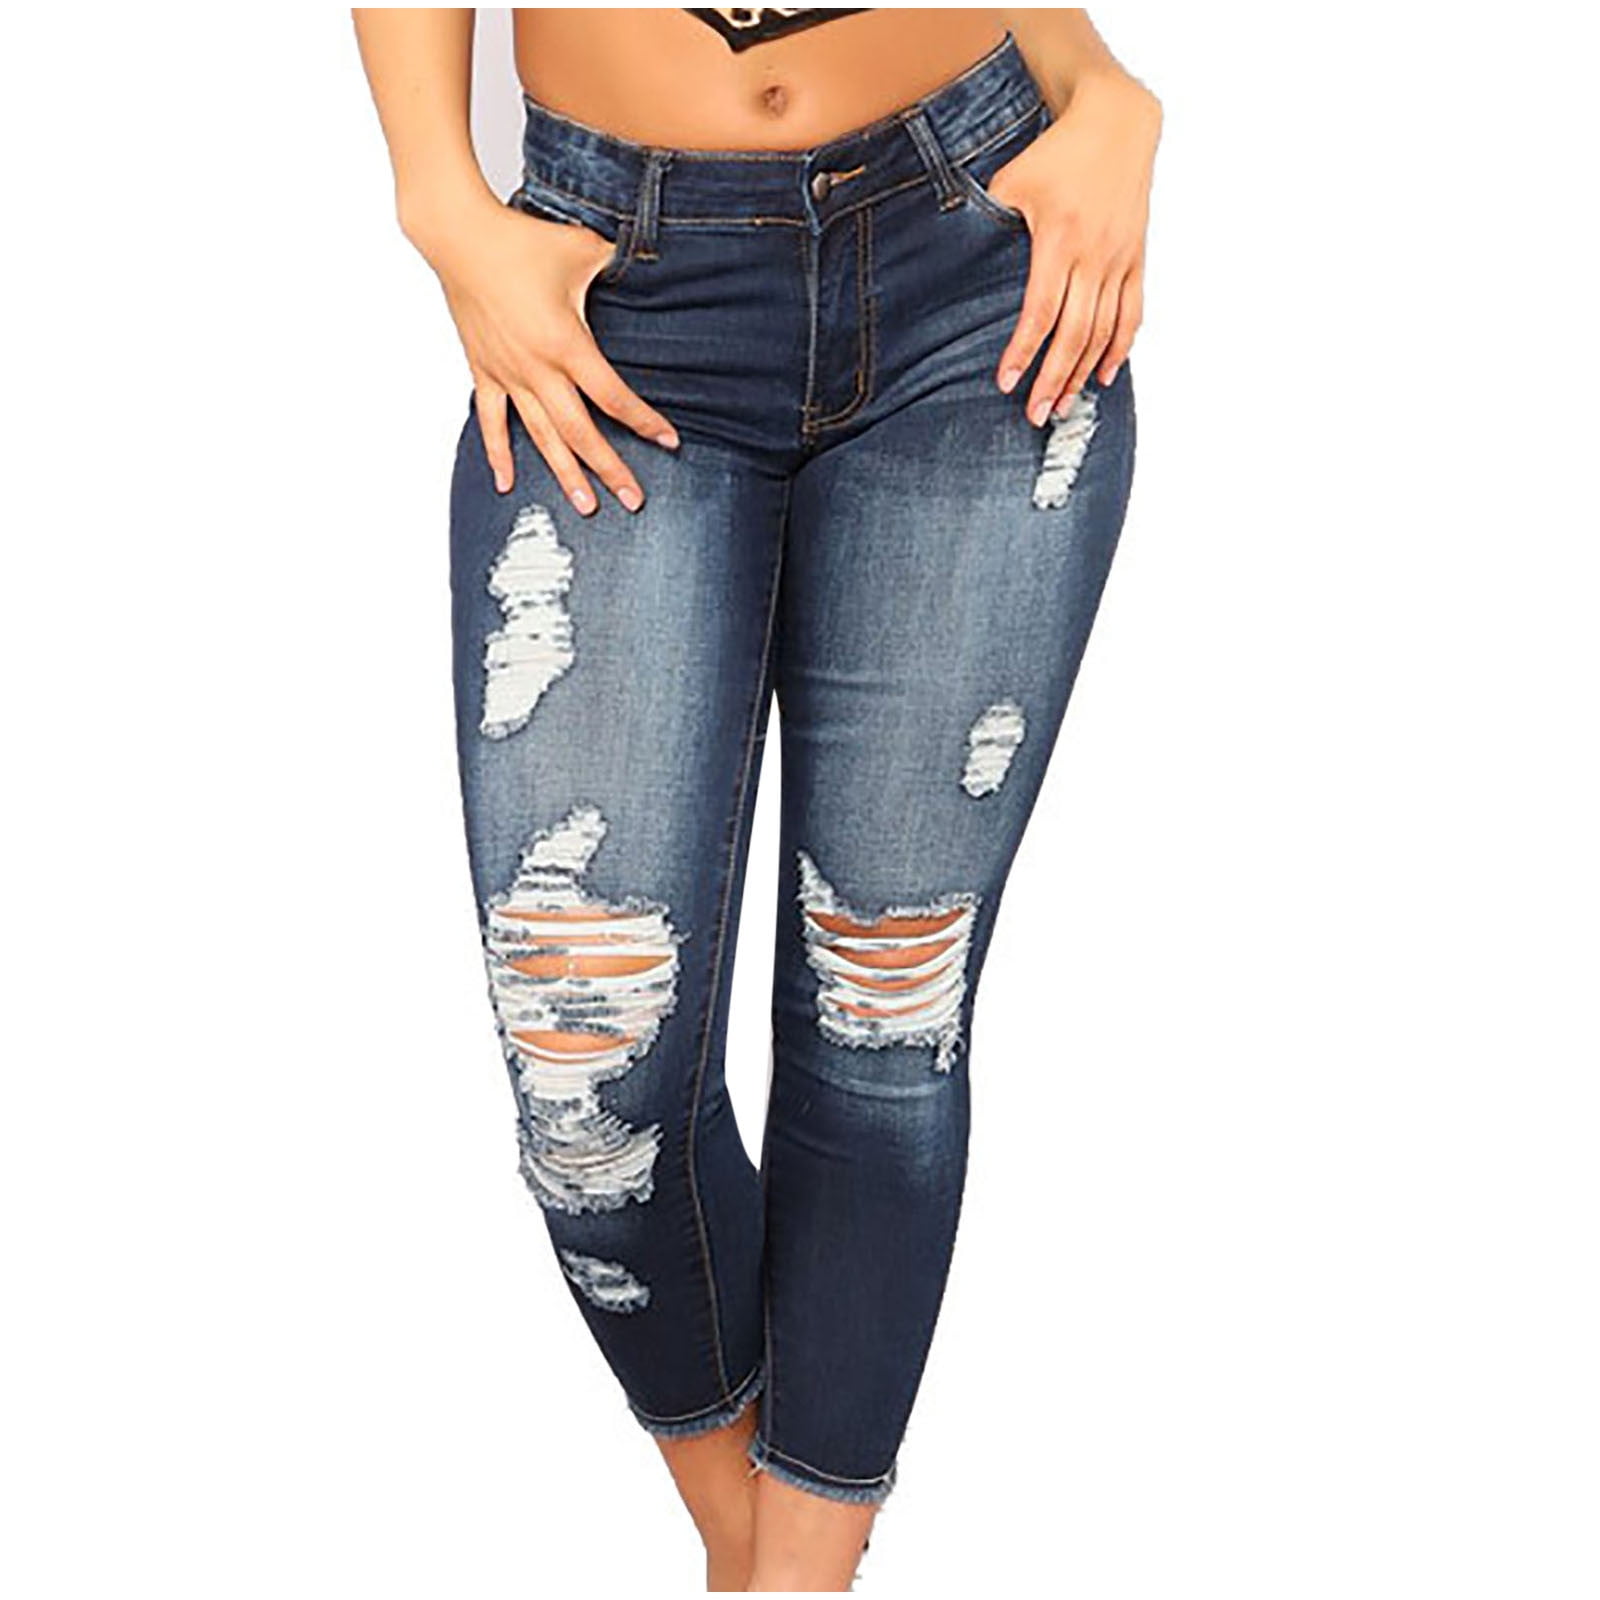 YYDGH Women Skinny Ripped Jeans Stretch Distressed Destroyed Denim